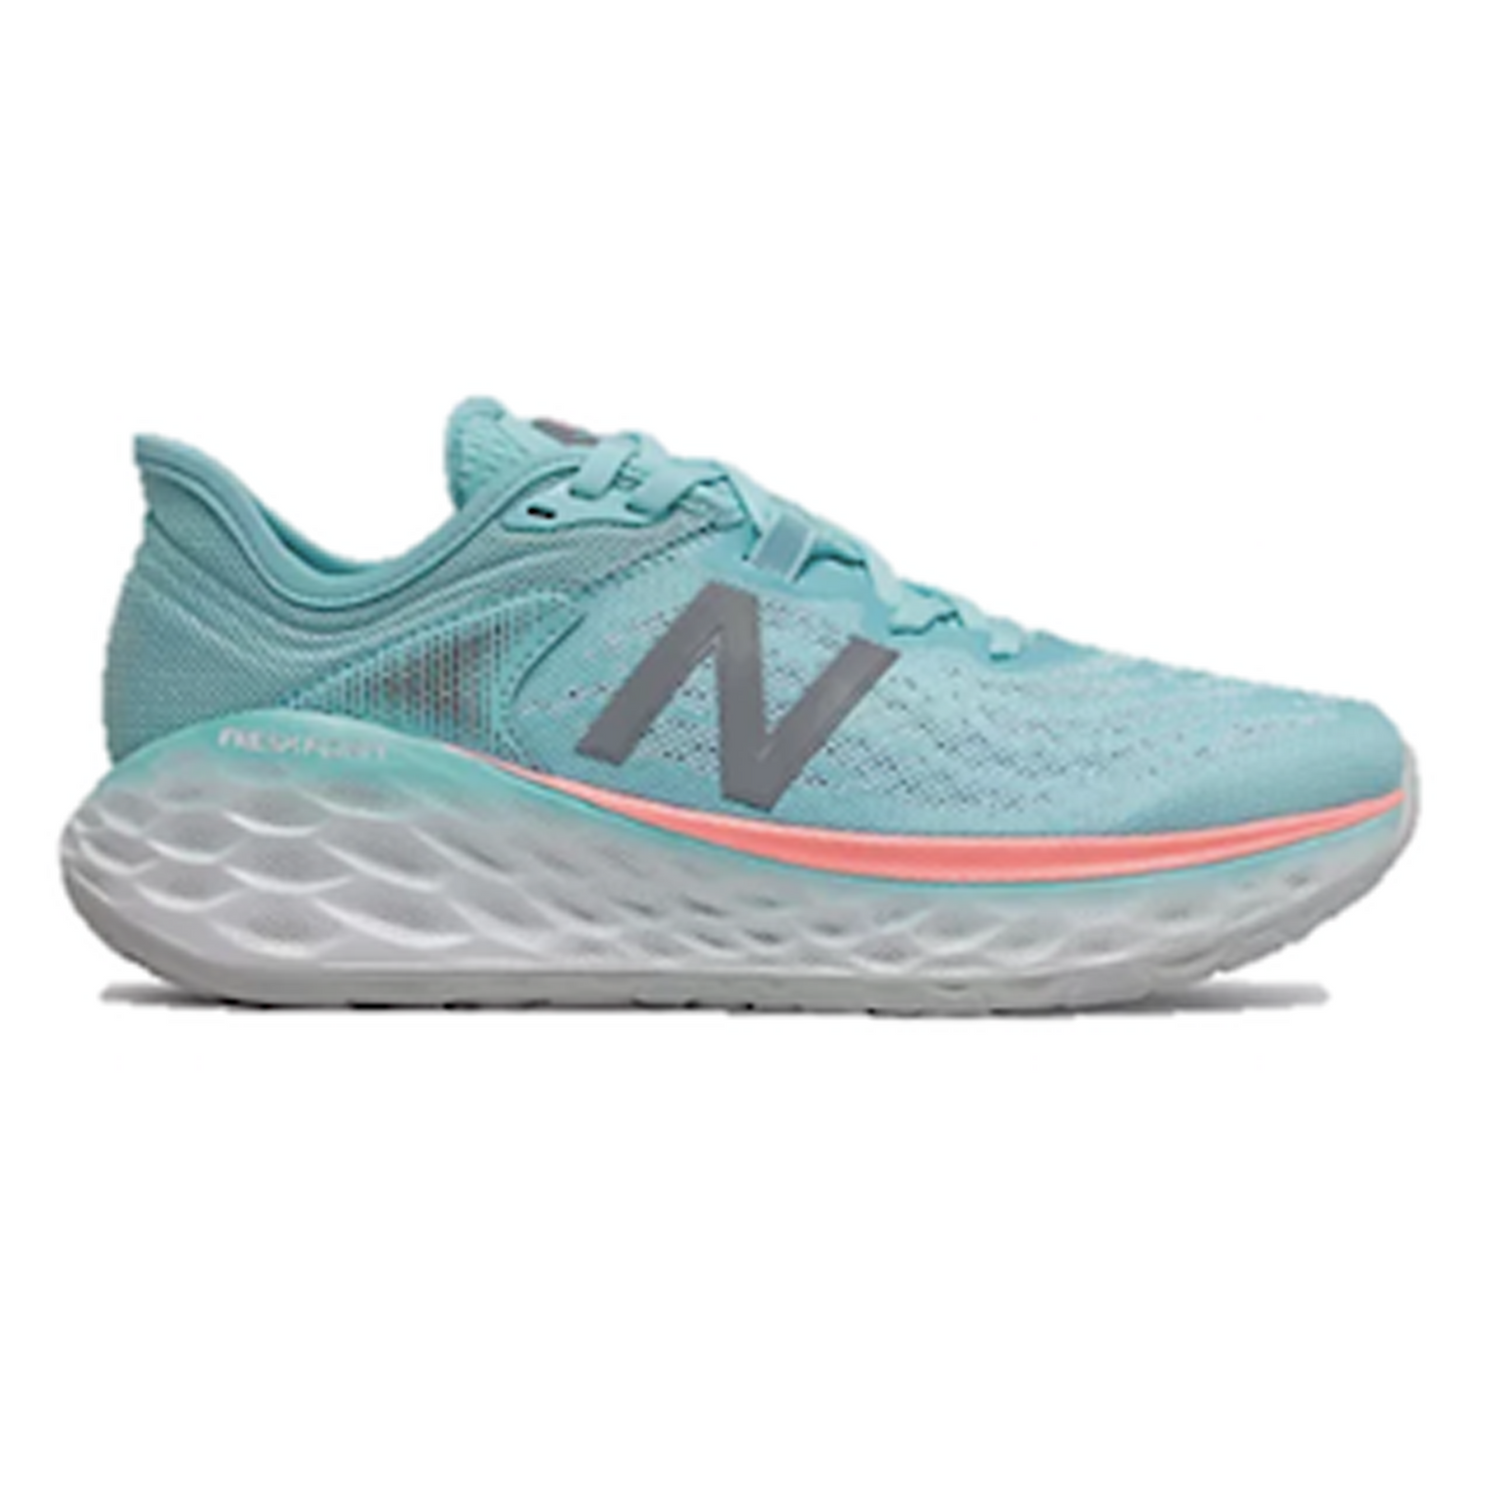 Women's New Balance More V2 running shoe. Upper in the colour light blue and fresh foam sole is white, with a small pink line. 